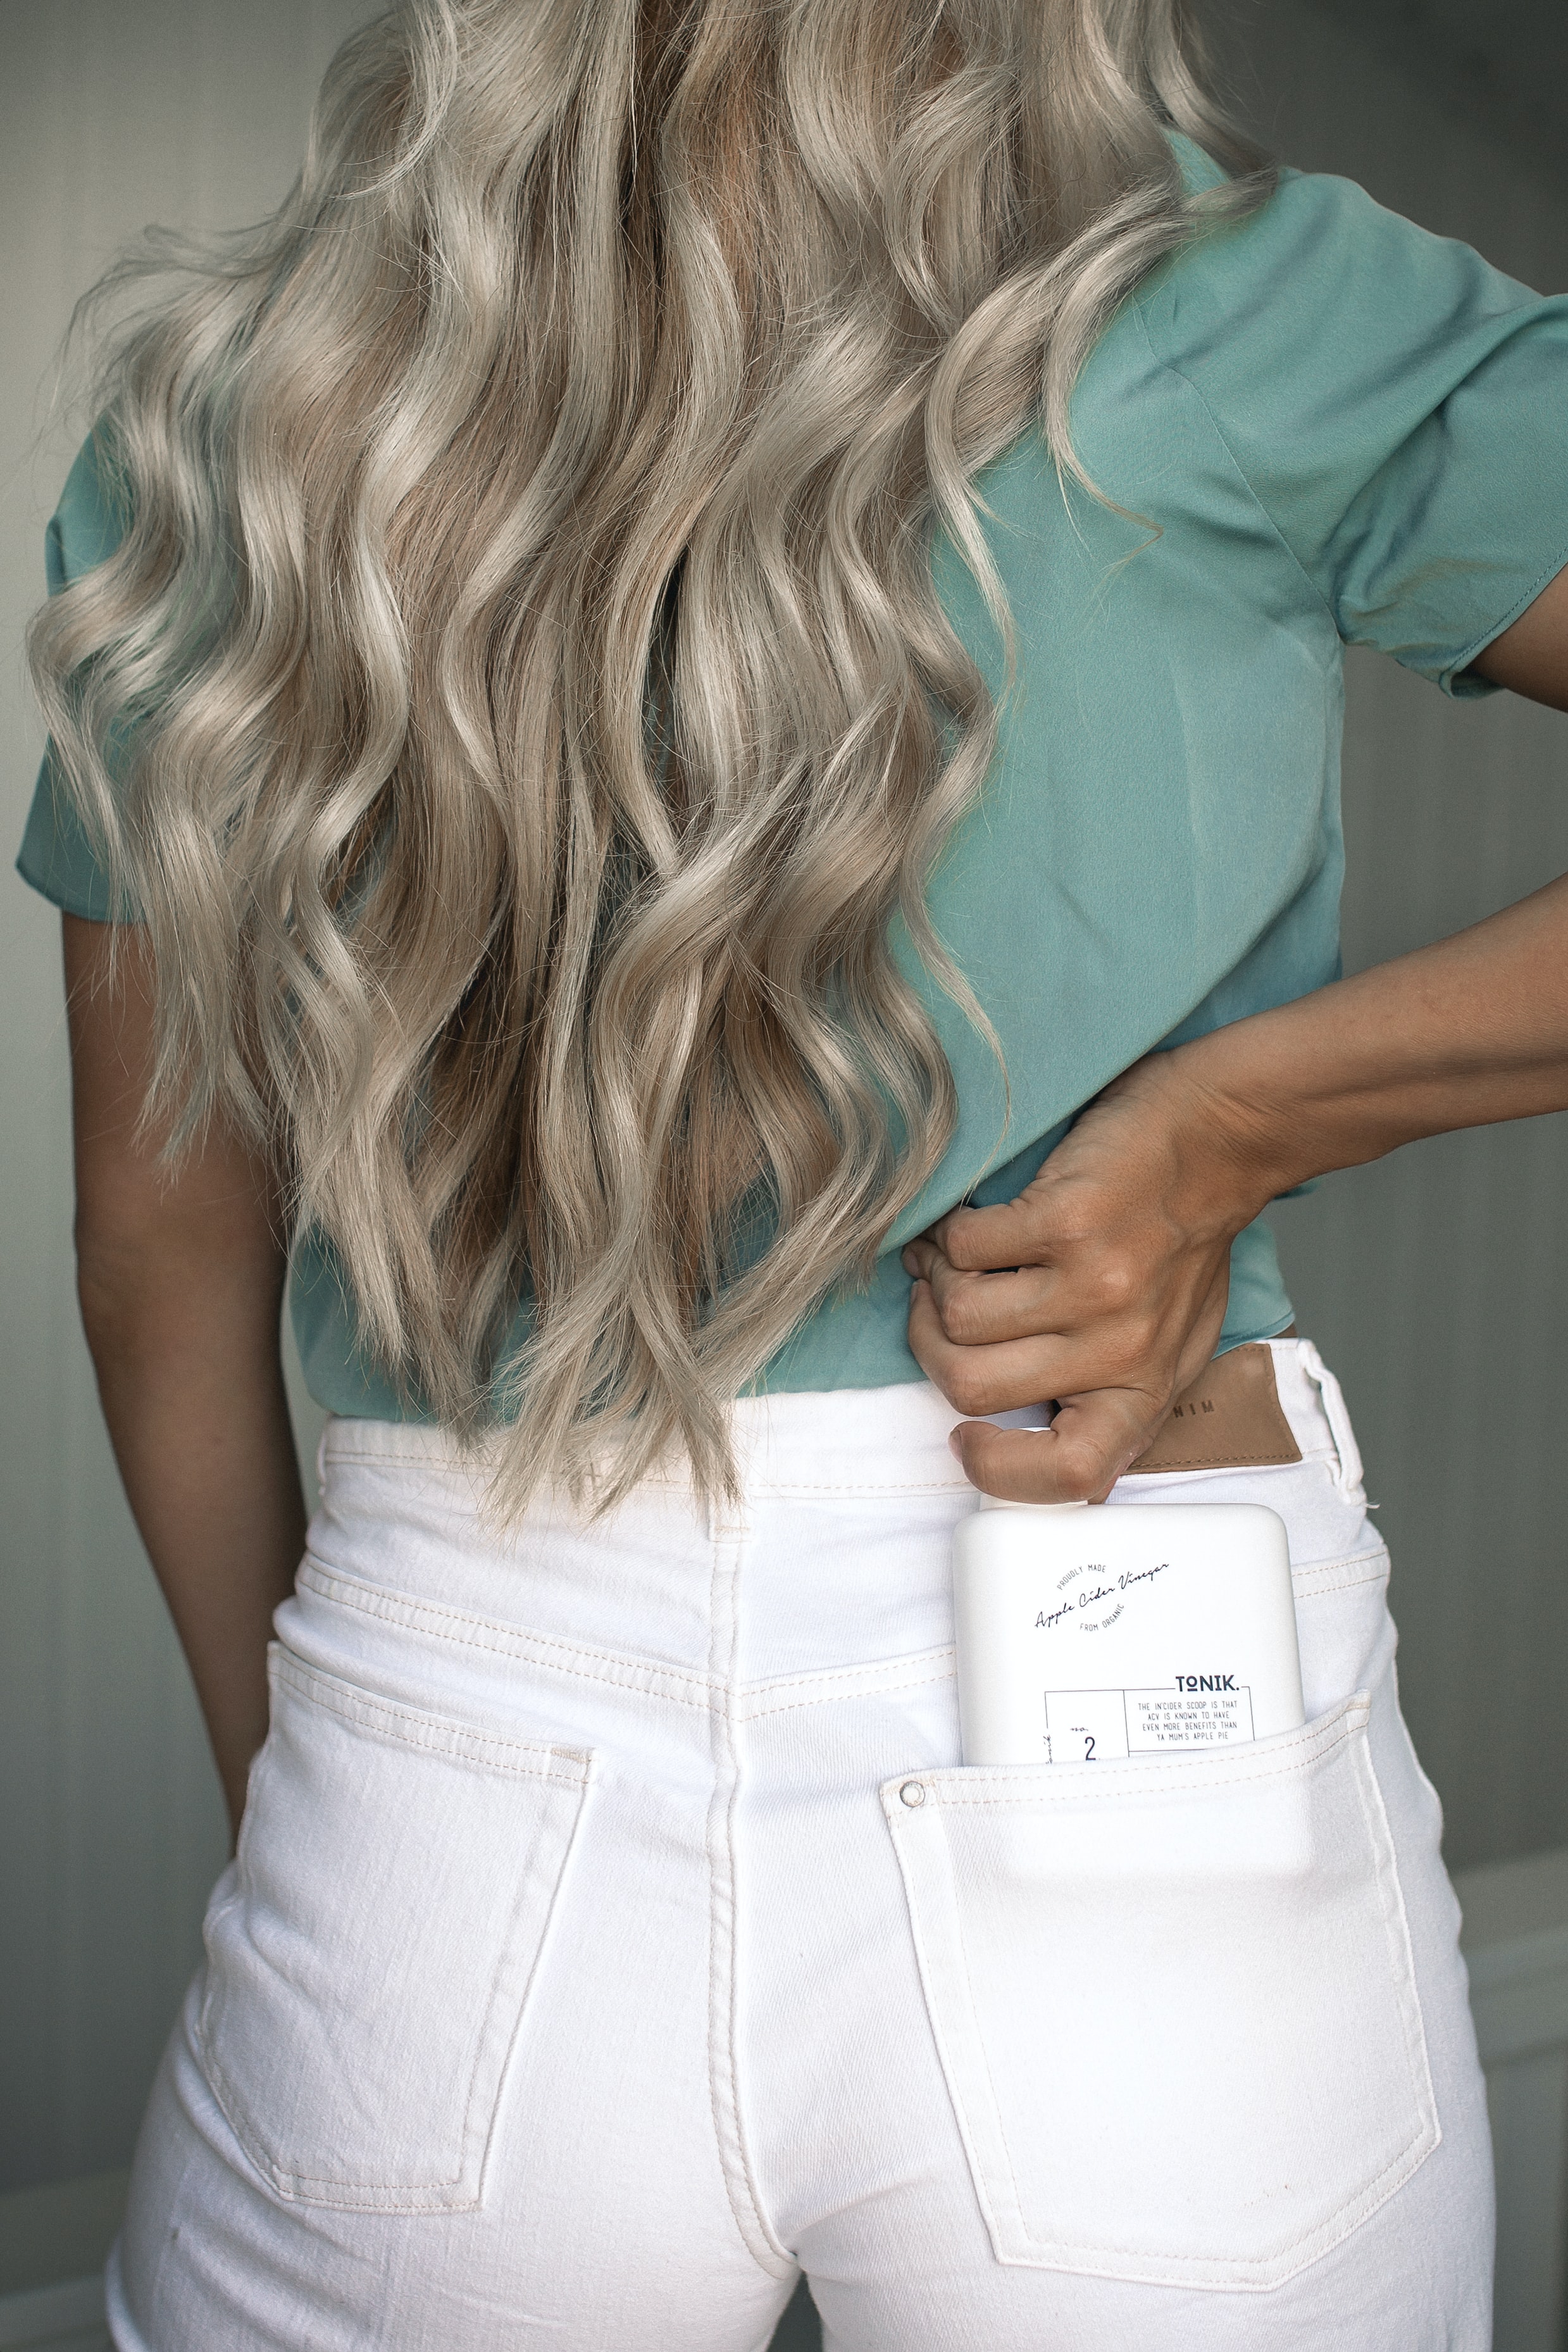 The Olaplex Dupes Just As Good As The Real Thing!